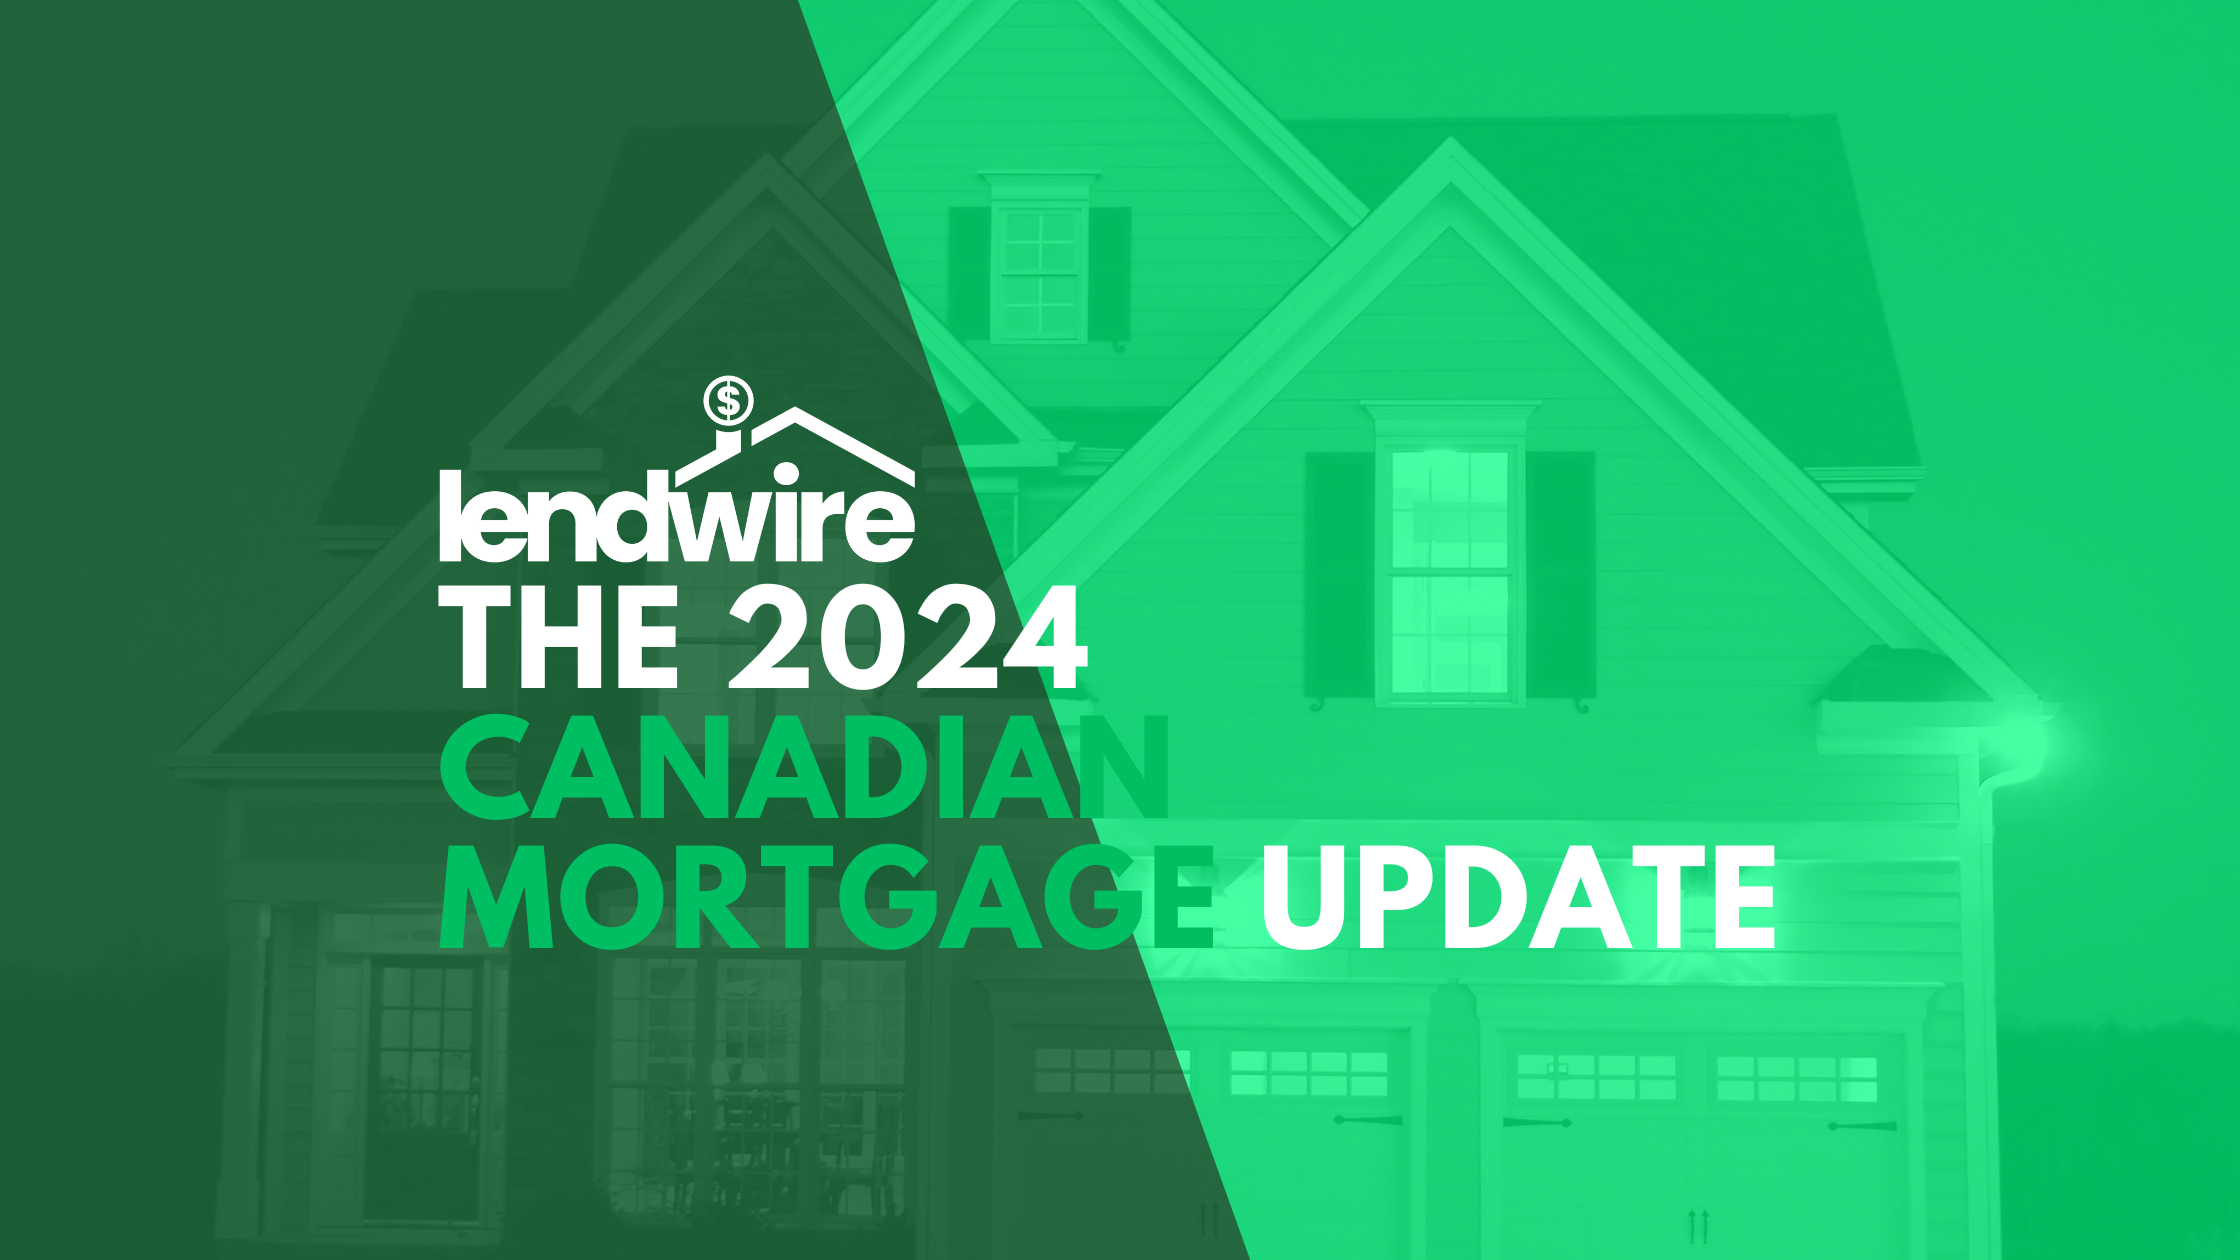 The 2024 Canadian Mortgage Update